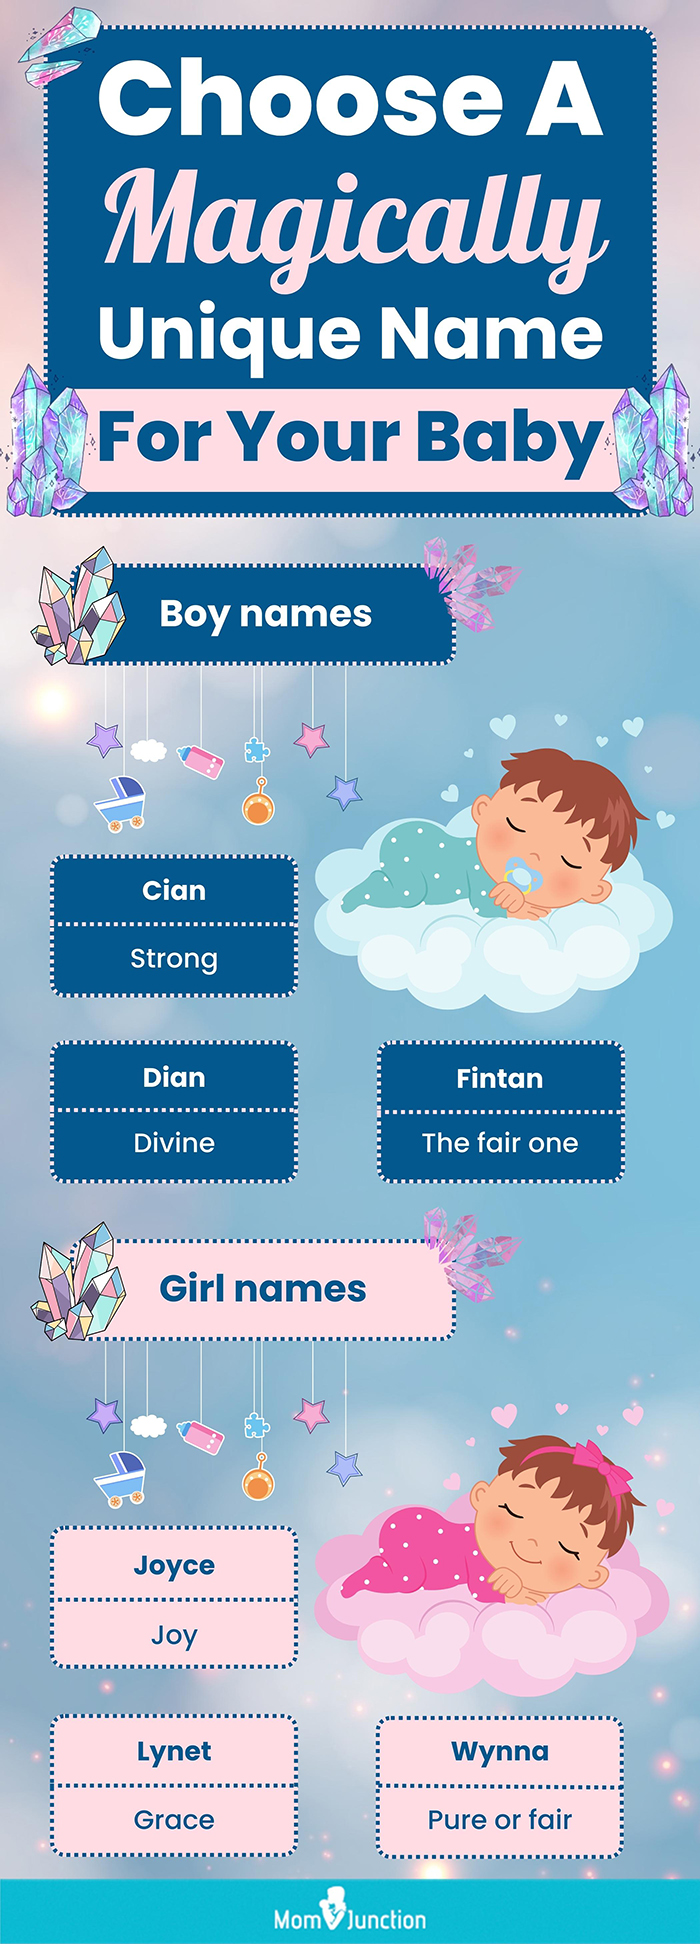 choose a magically unique name for your baby [infographic]